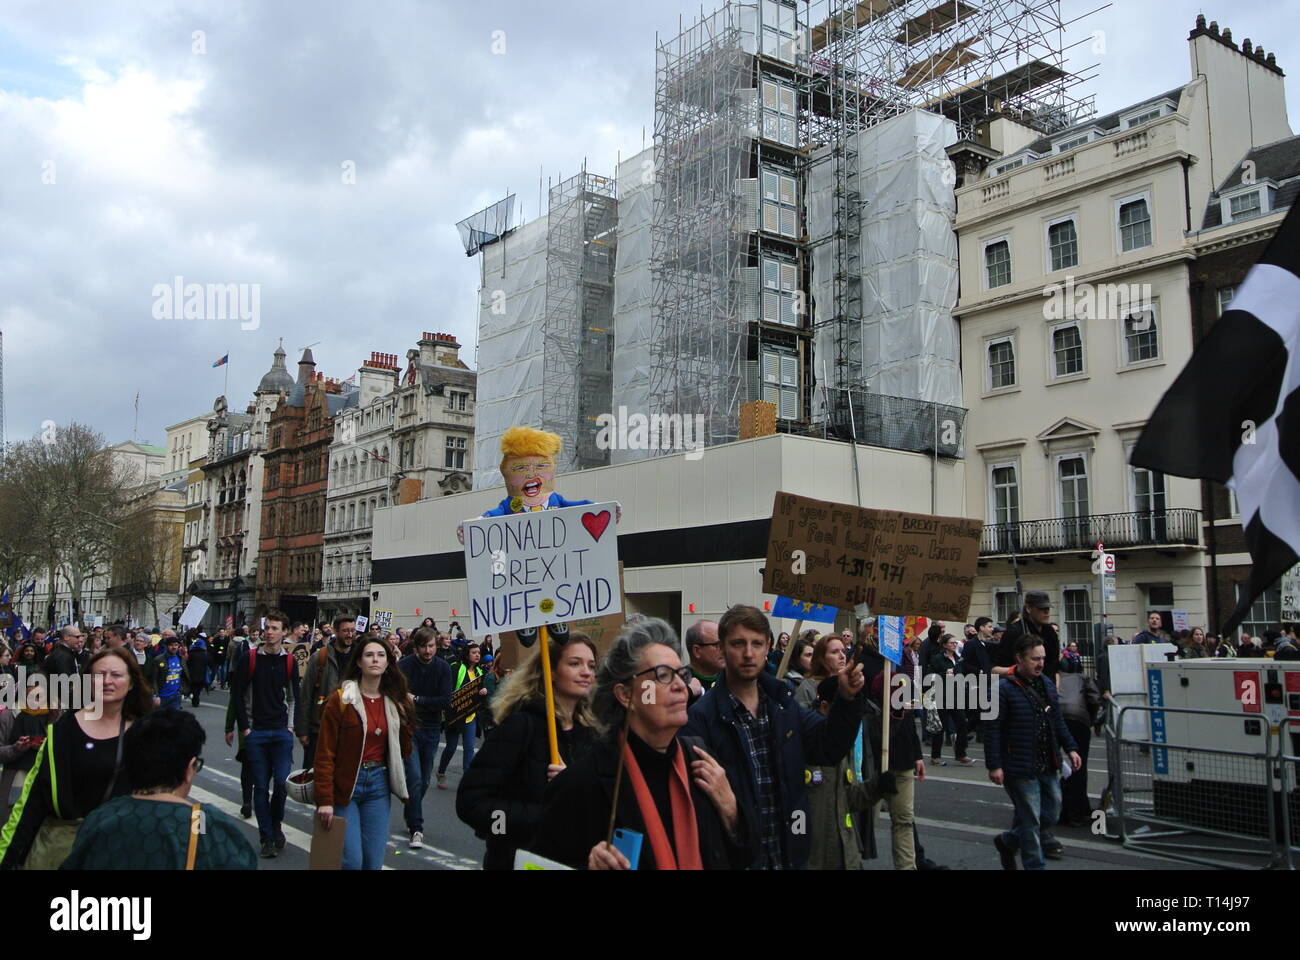 Brexit sign, Trump, The People's Vote March 2019, London, UK Stock Photo